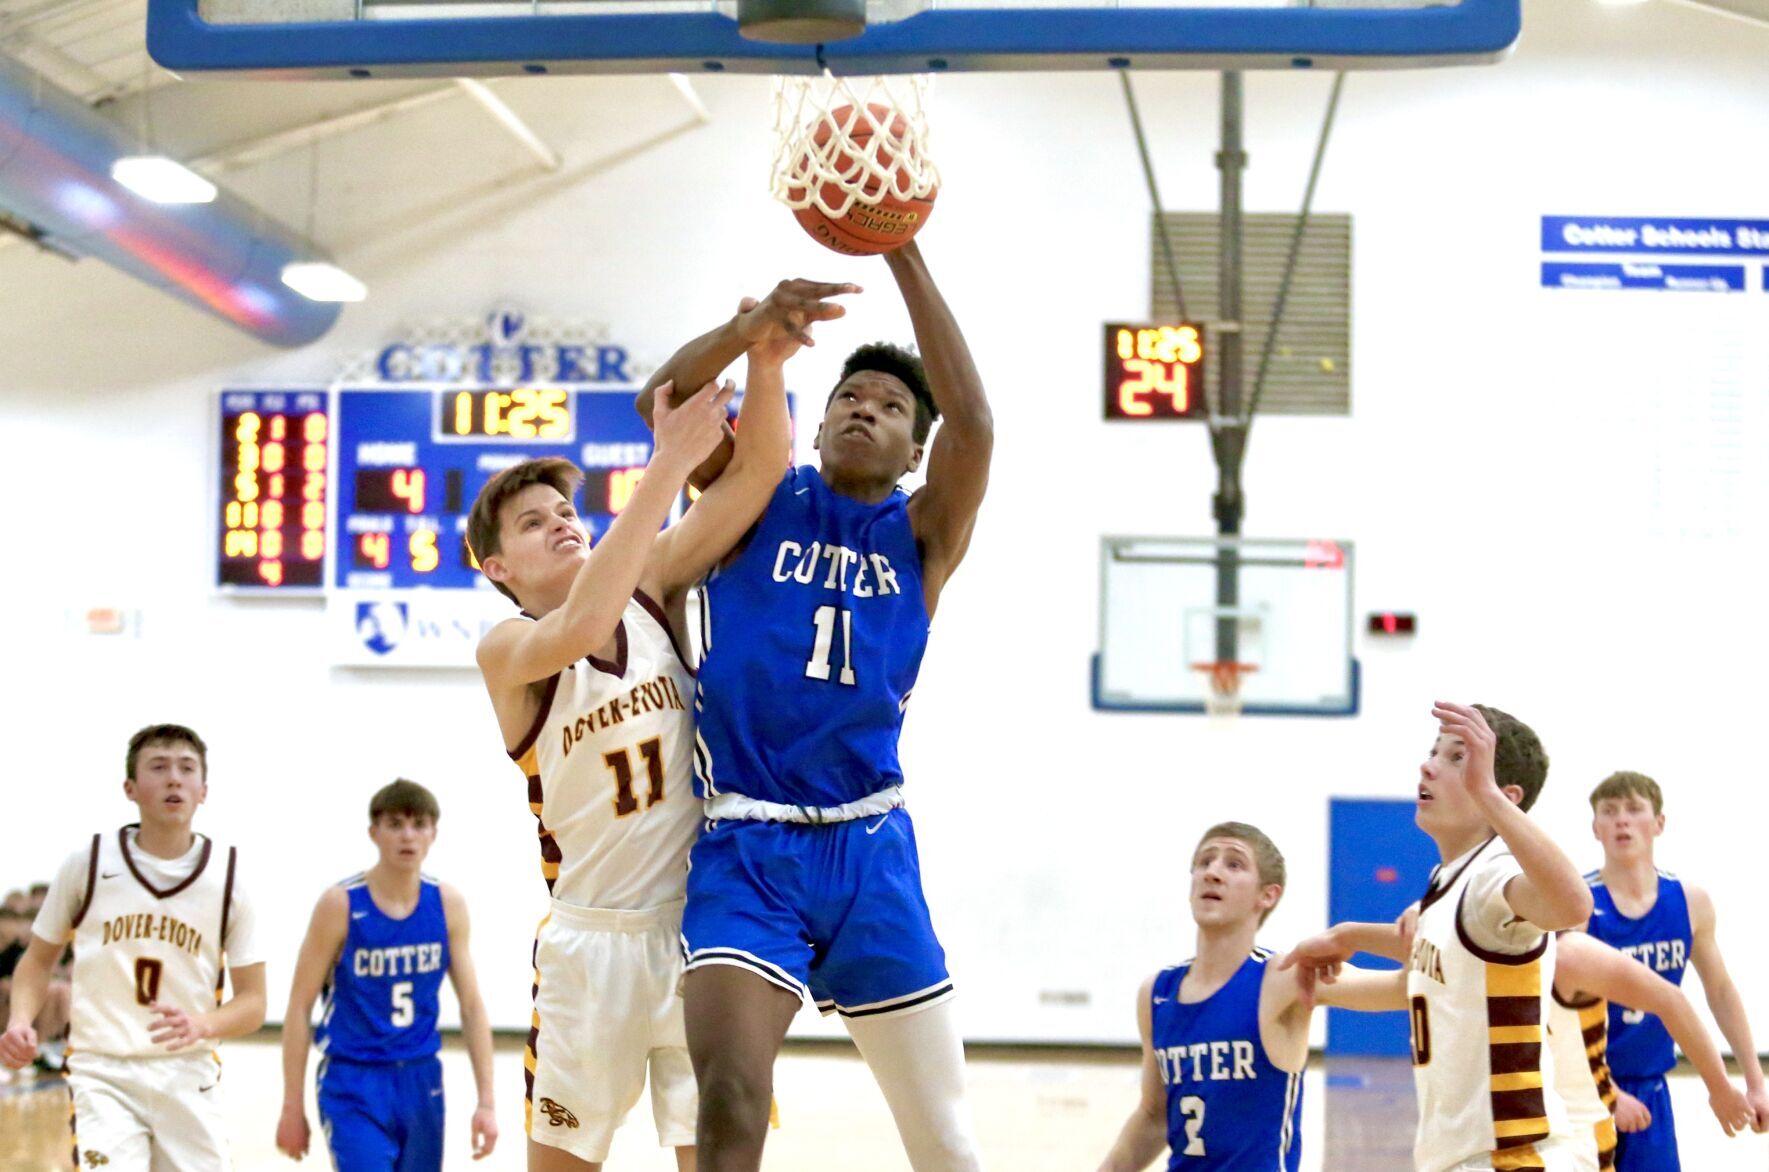 Cotter boys basketball team’s Senior Gabe Stewart leads with 14 points in fourth consecutive win